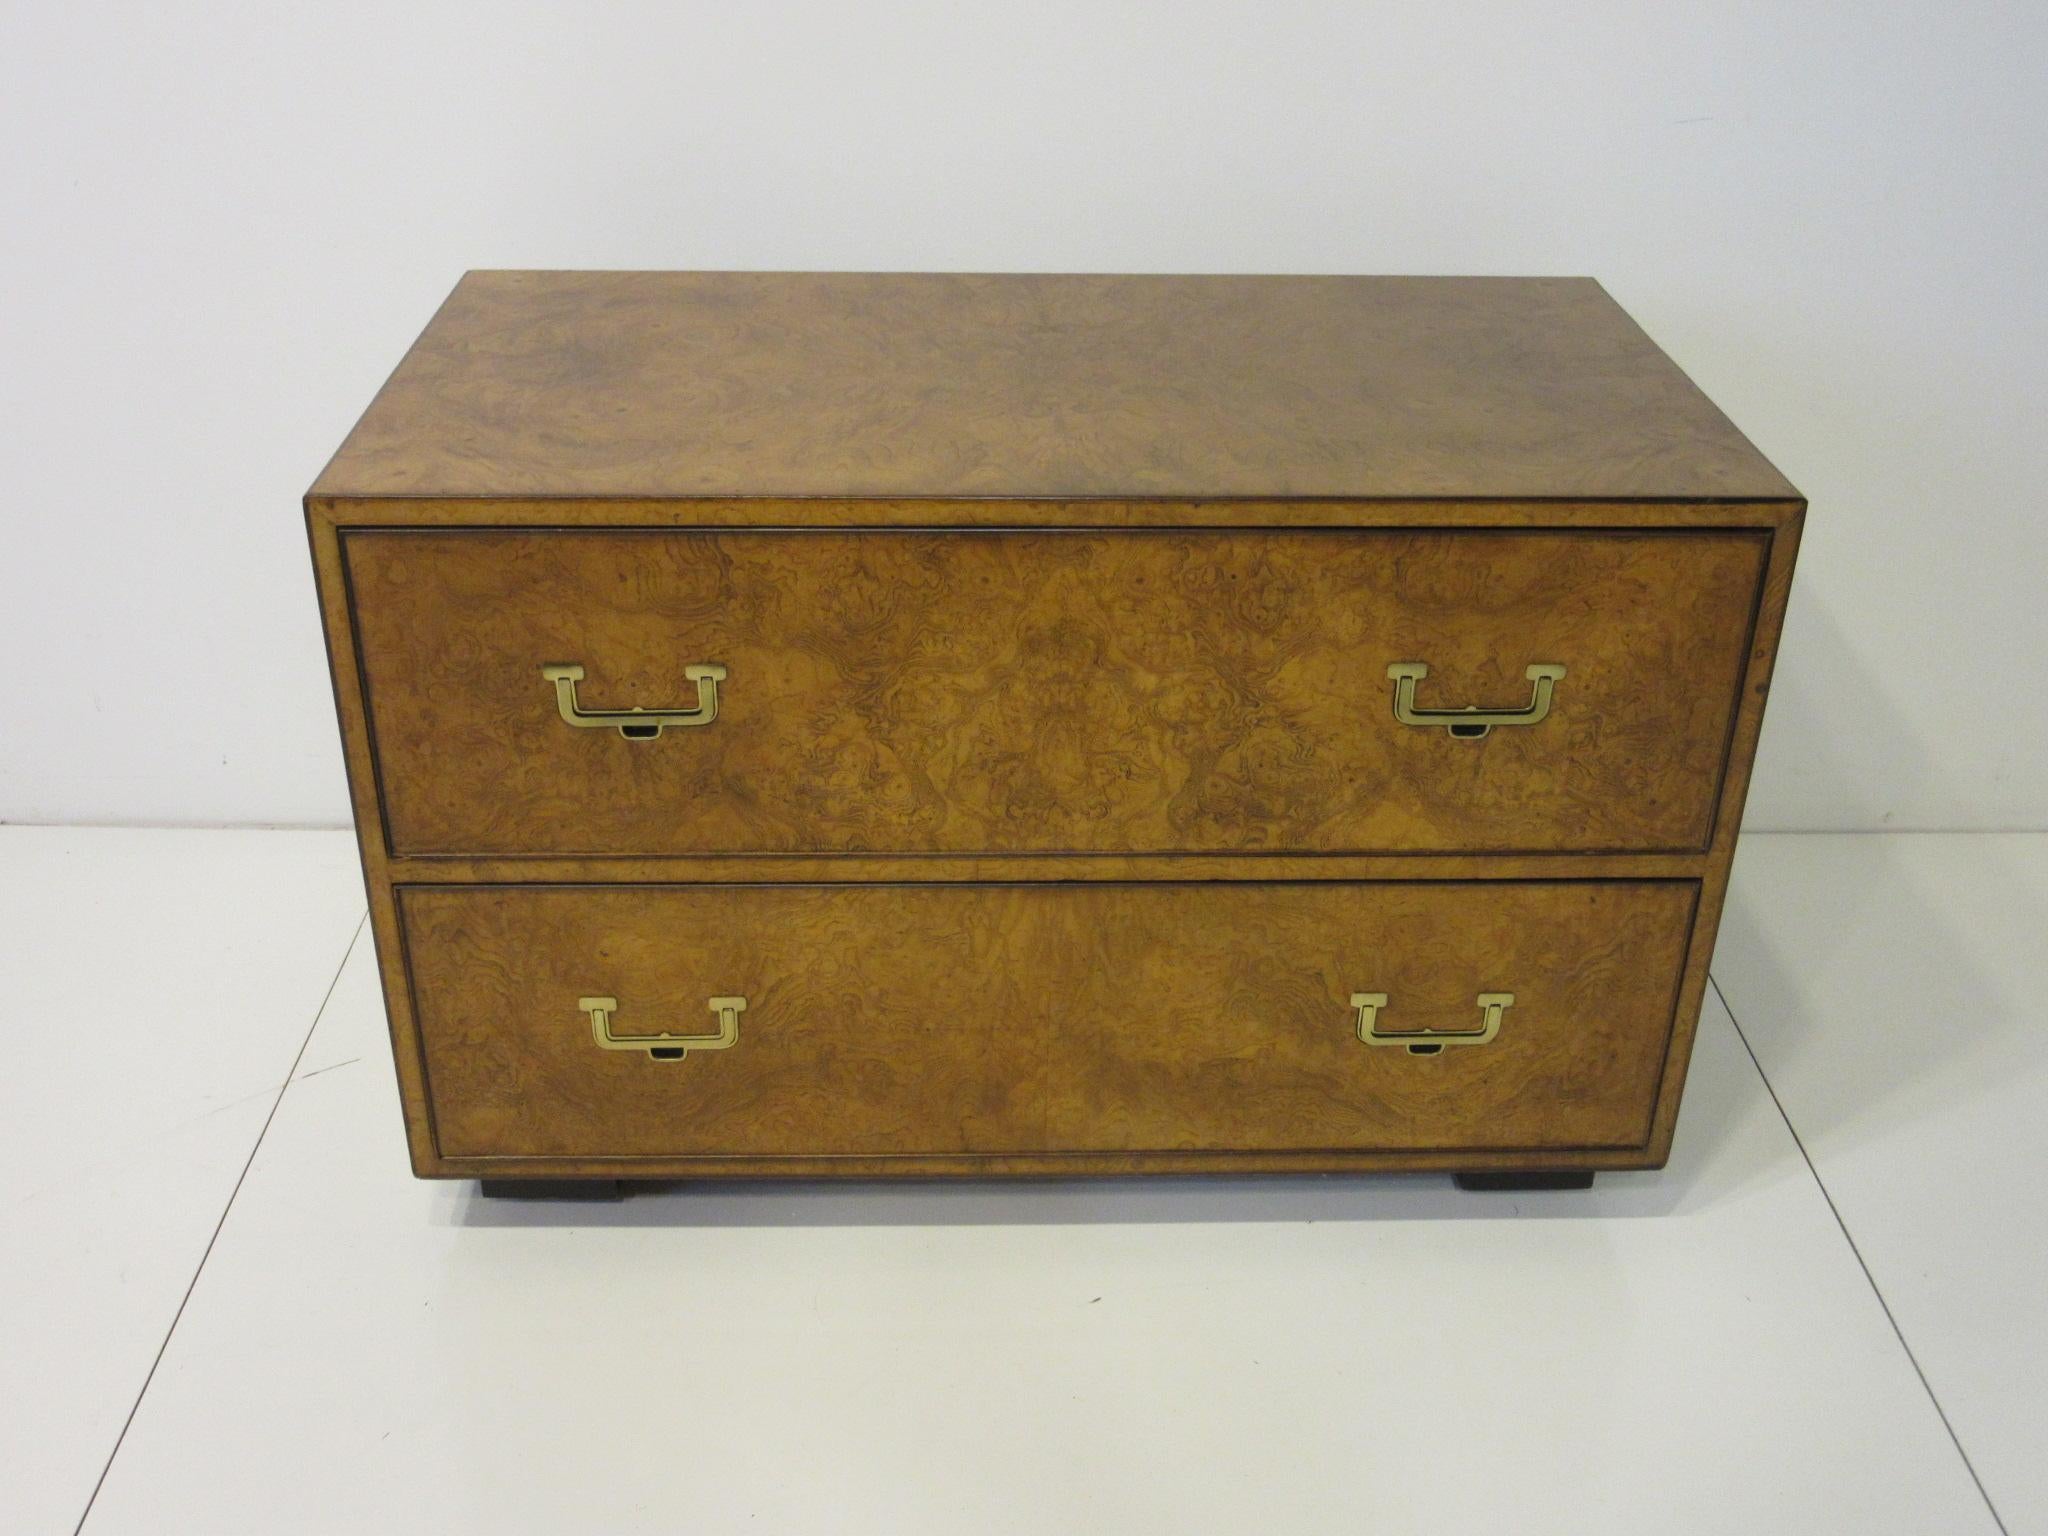 A beautifully burled book matched finished two-drawer low chest having inset brass pull handles and black legs with roller ball wheels to the bottom. Retains the manufactures label from the John Widdicomb furniture company Grand Rapids Michigan.